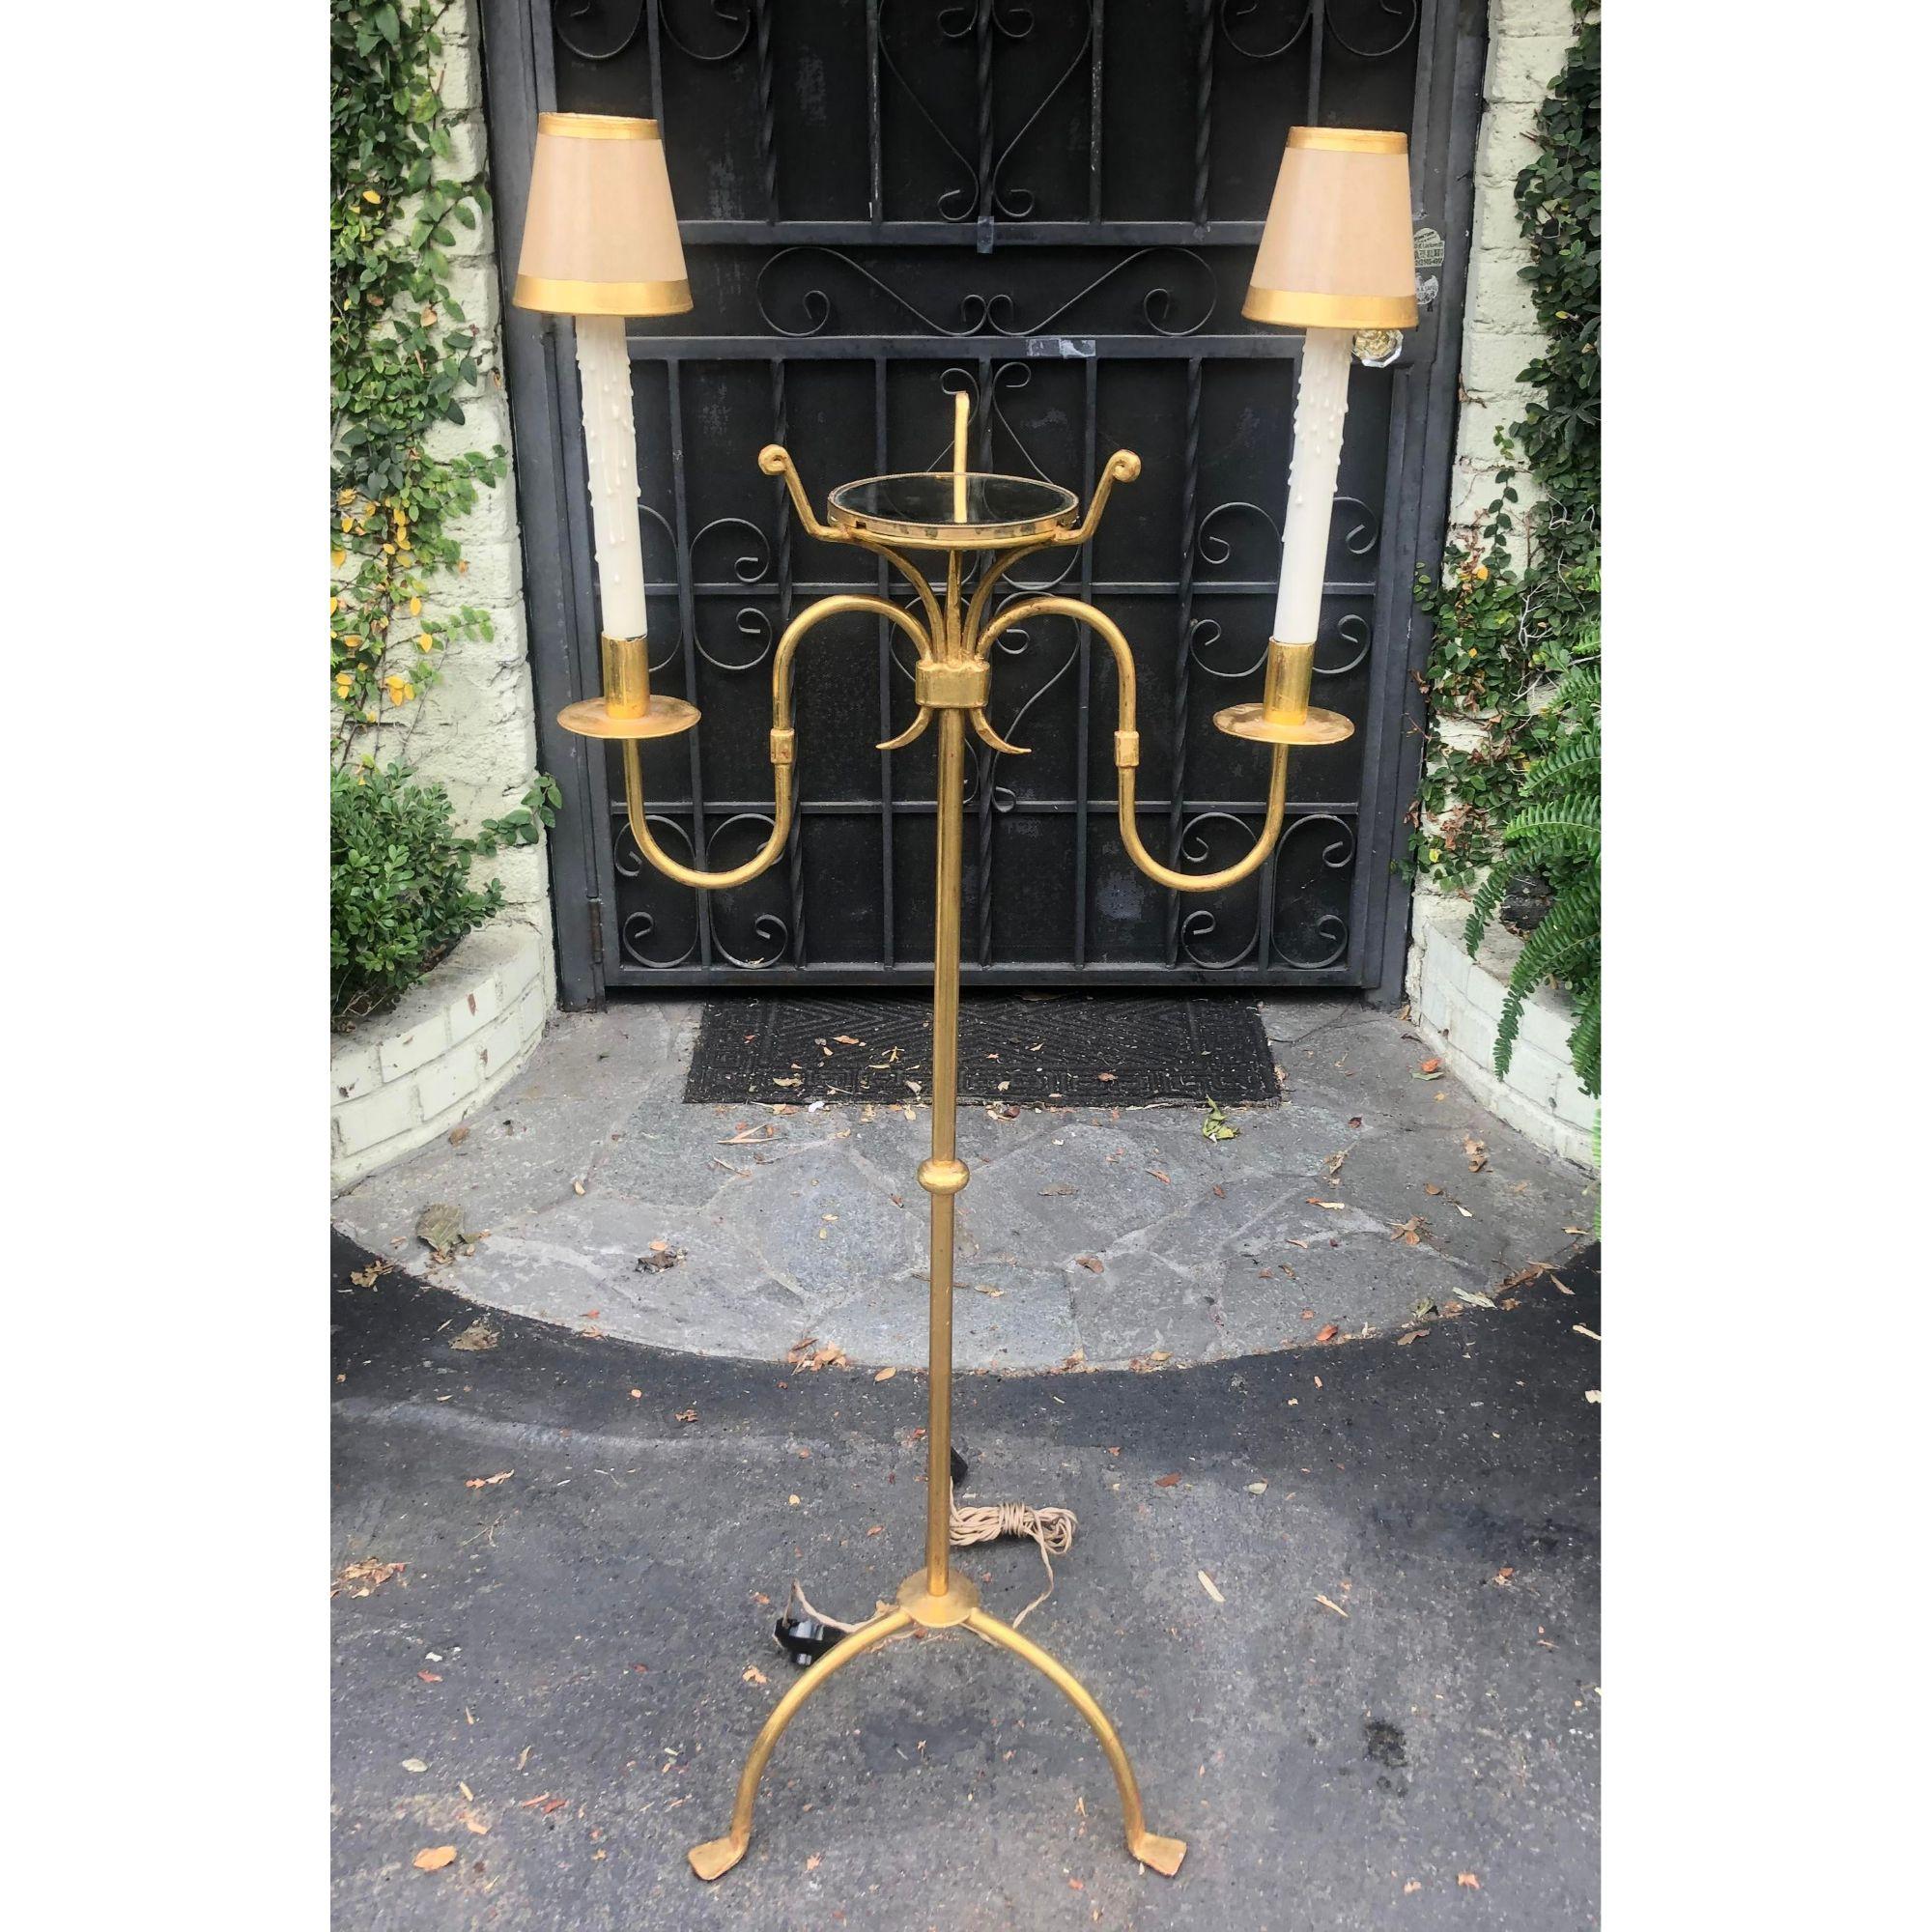 Vintage Tommi Parzinger gilt metal floor lamp

Additional information: 
Material: Metal
Color: Gold
Brand: Tommi Parzinger
Designer: Tommi Parzinger
Period: 1960s
Place of Origin: North America
Styles: Traditional
Lamp Shade: Not